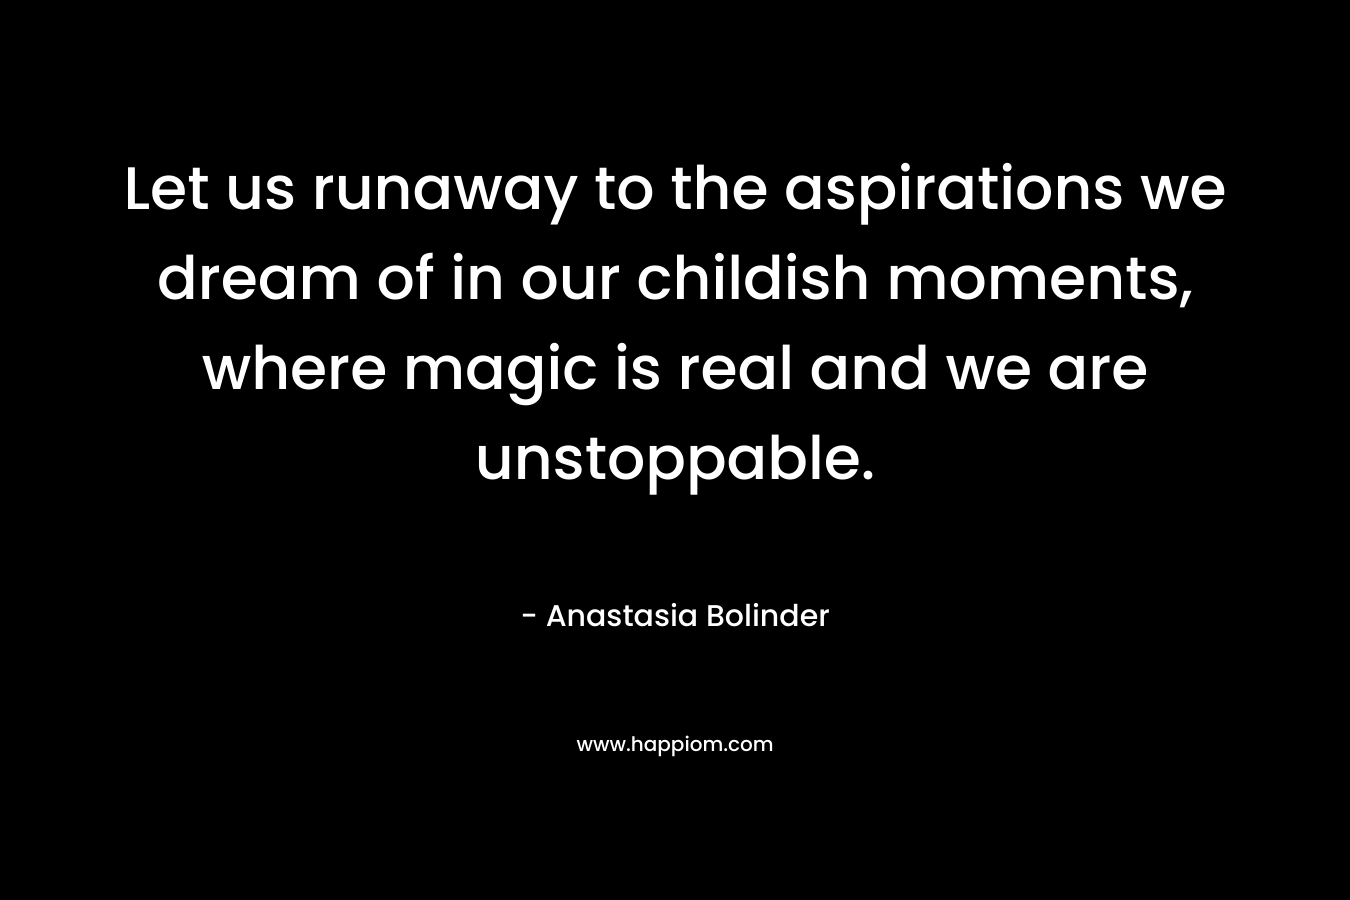 Let us runaway to the aspirations we dream of in our childish moments, where magic is real and we are unstoppable.